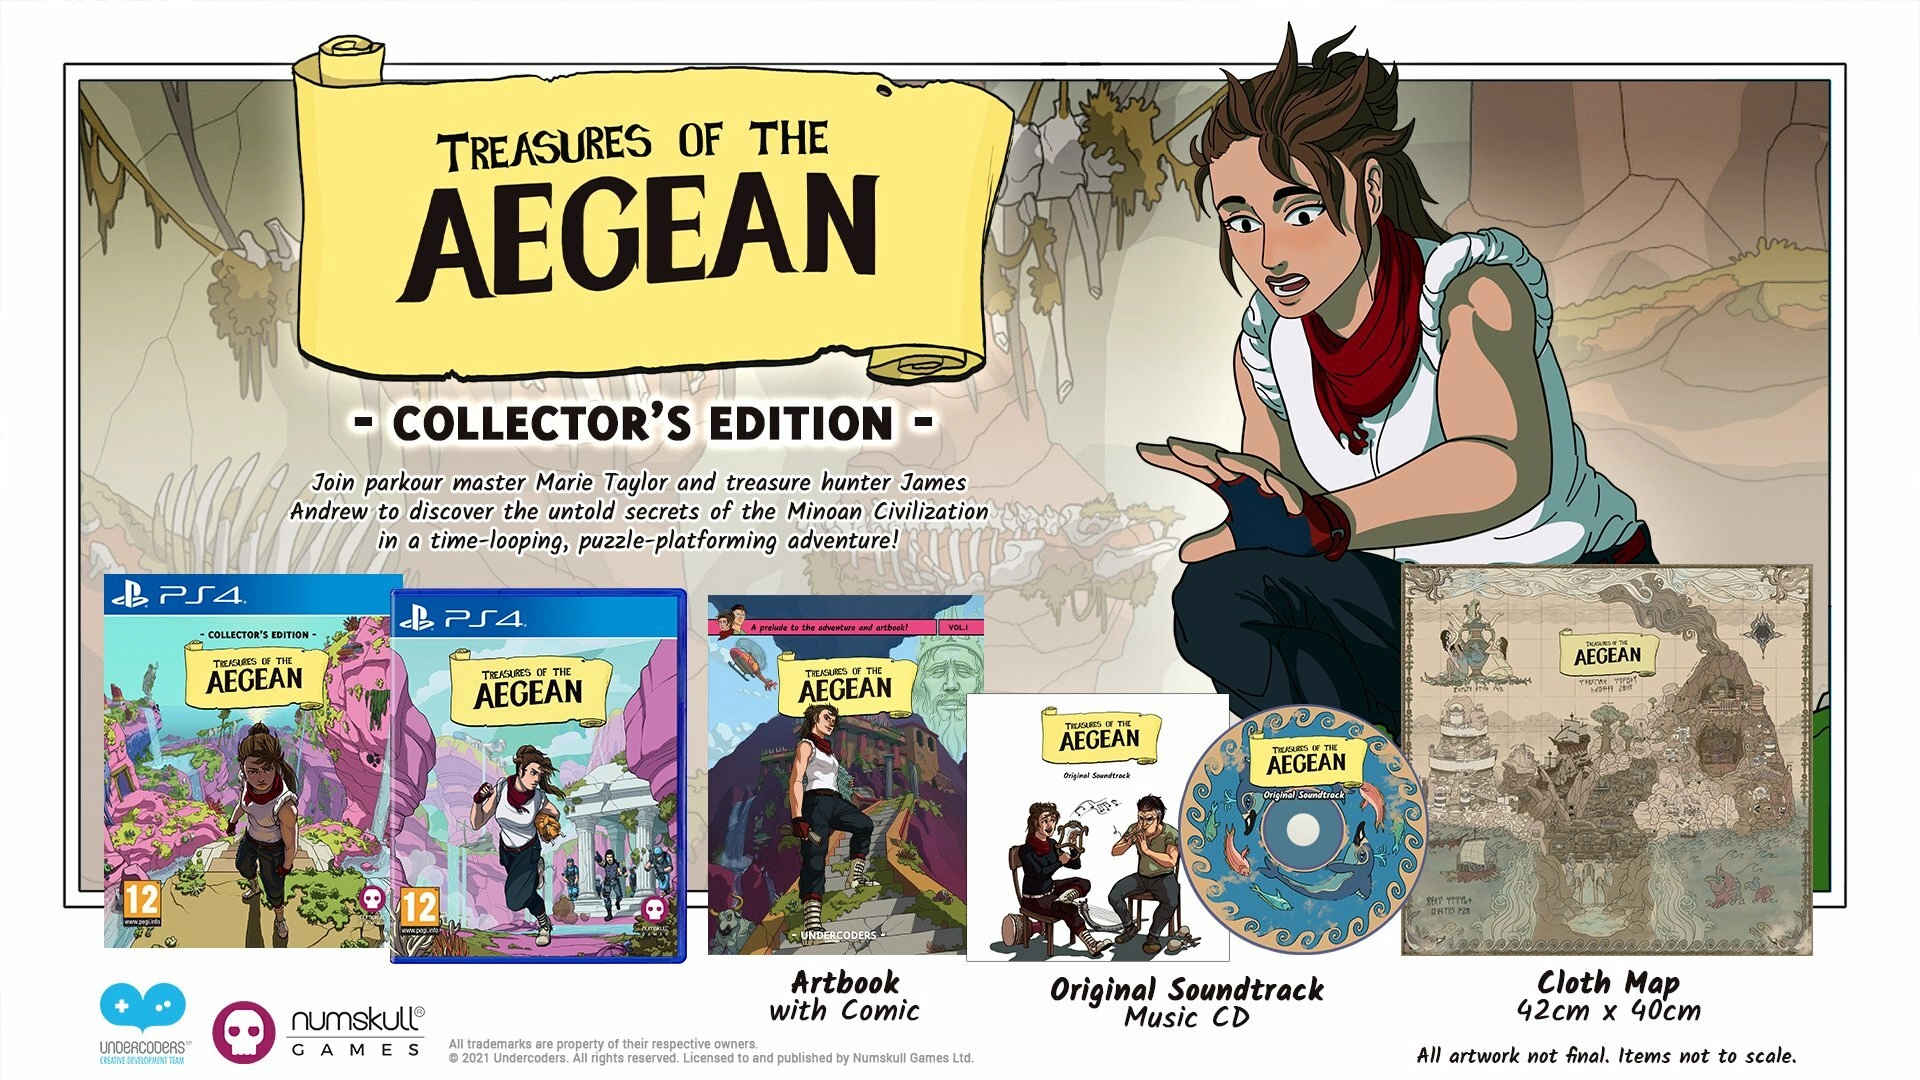 Treasures of the Aegean - Collector's Edition (PS4), Numskull Games